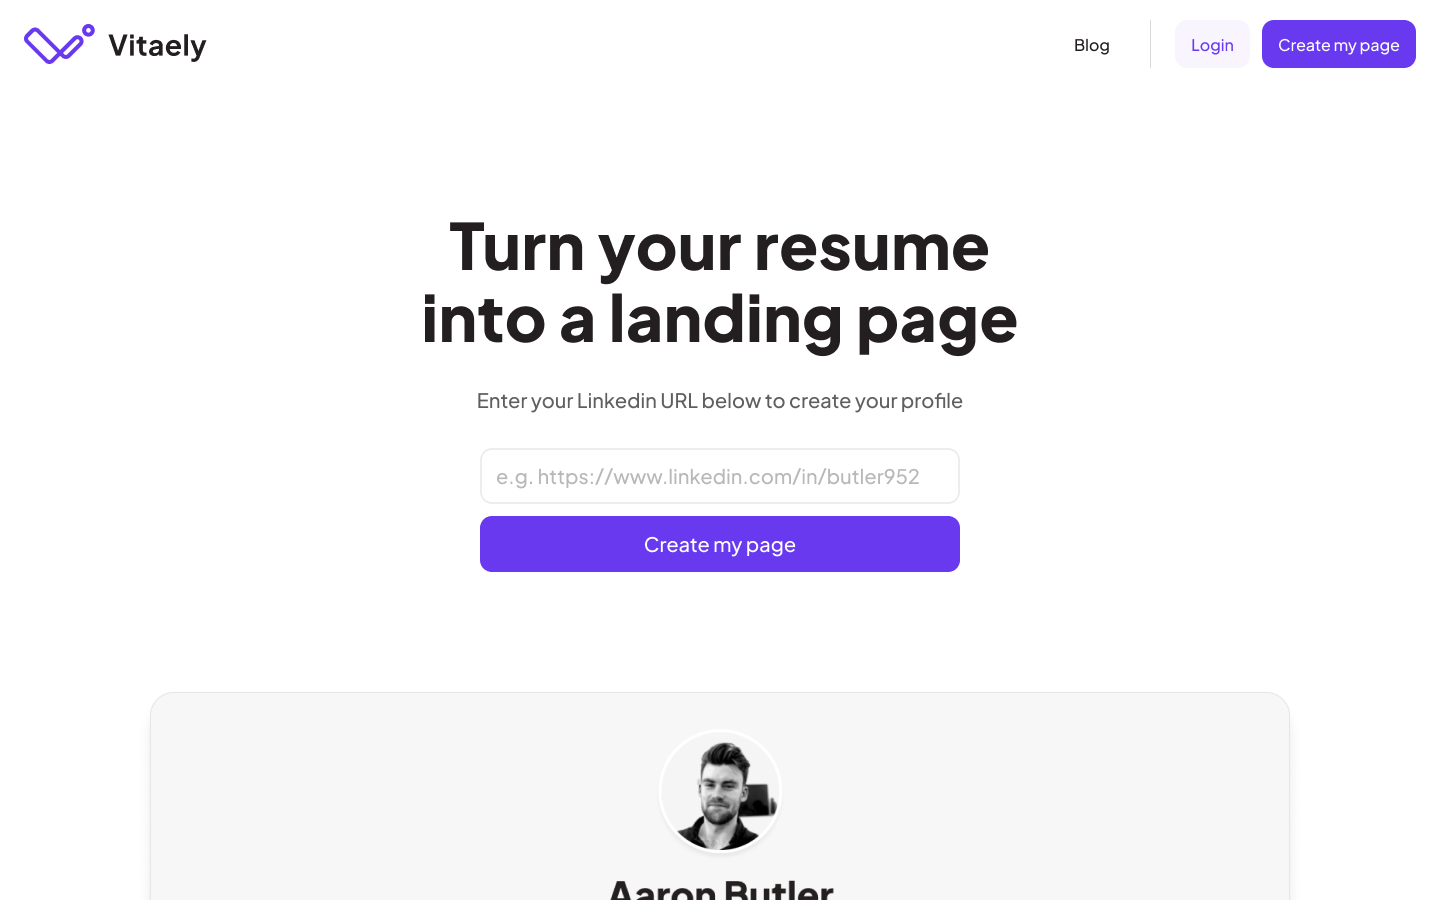 Vitaely landing page: Variant C